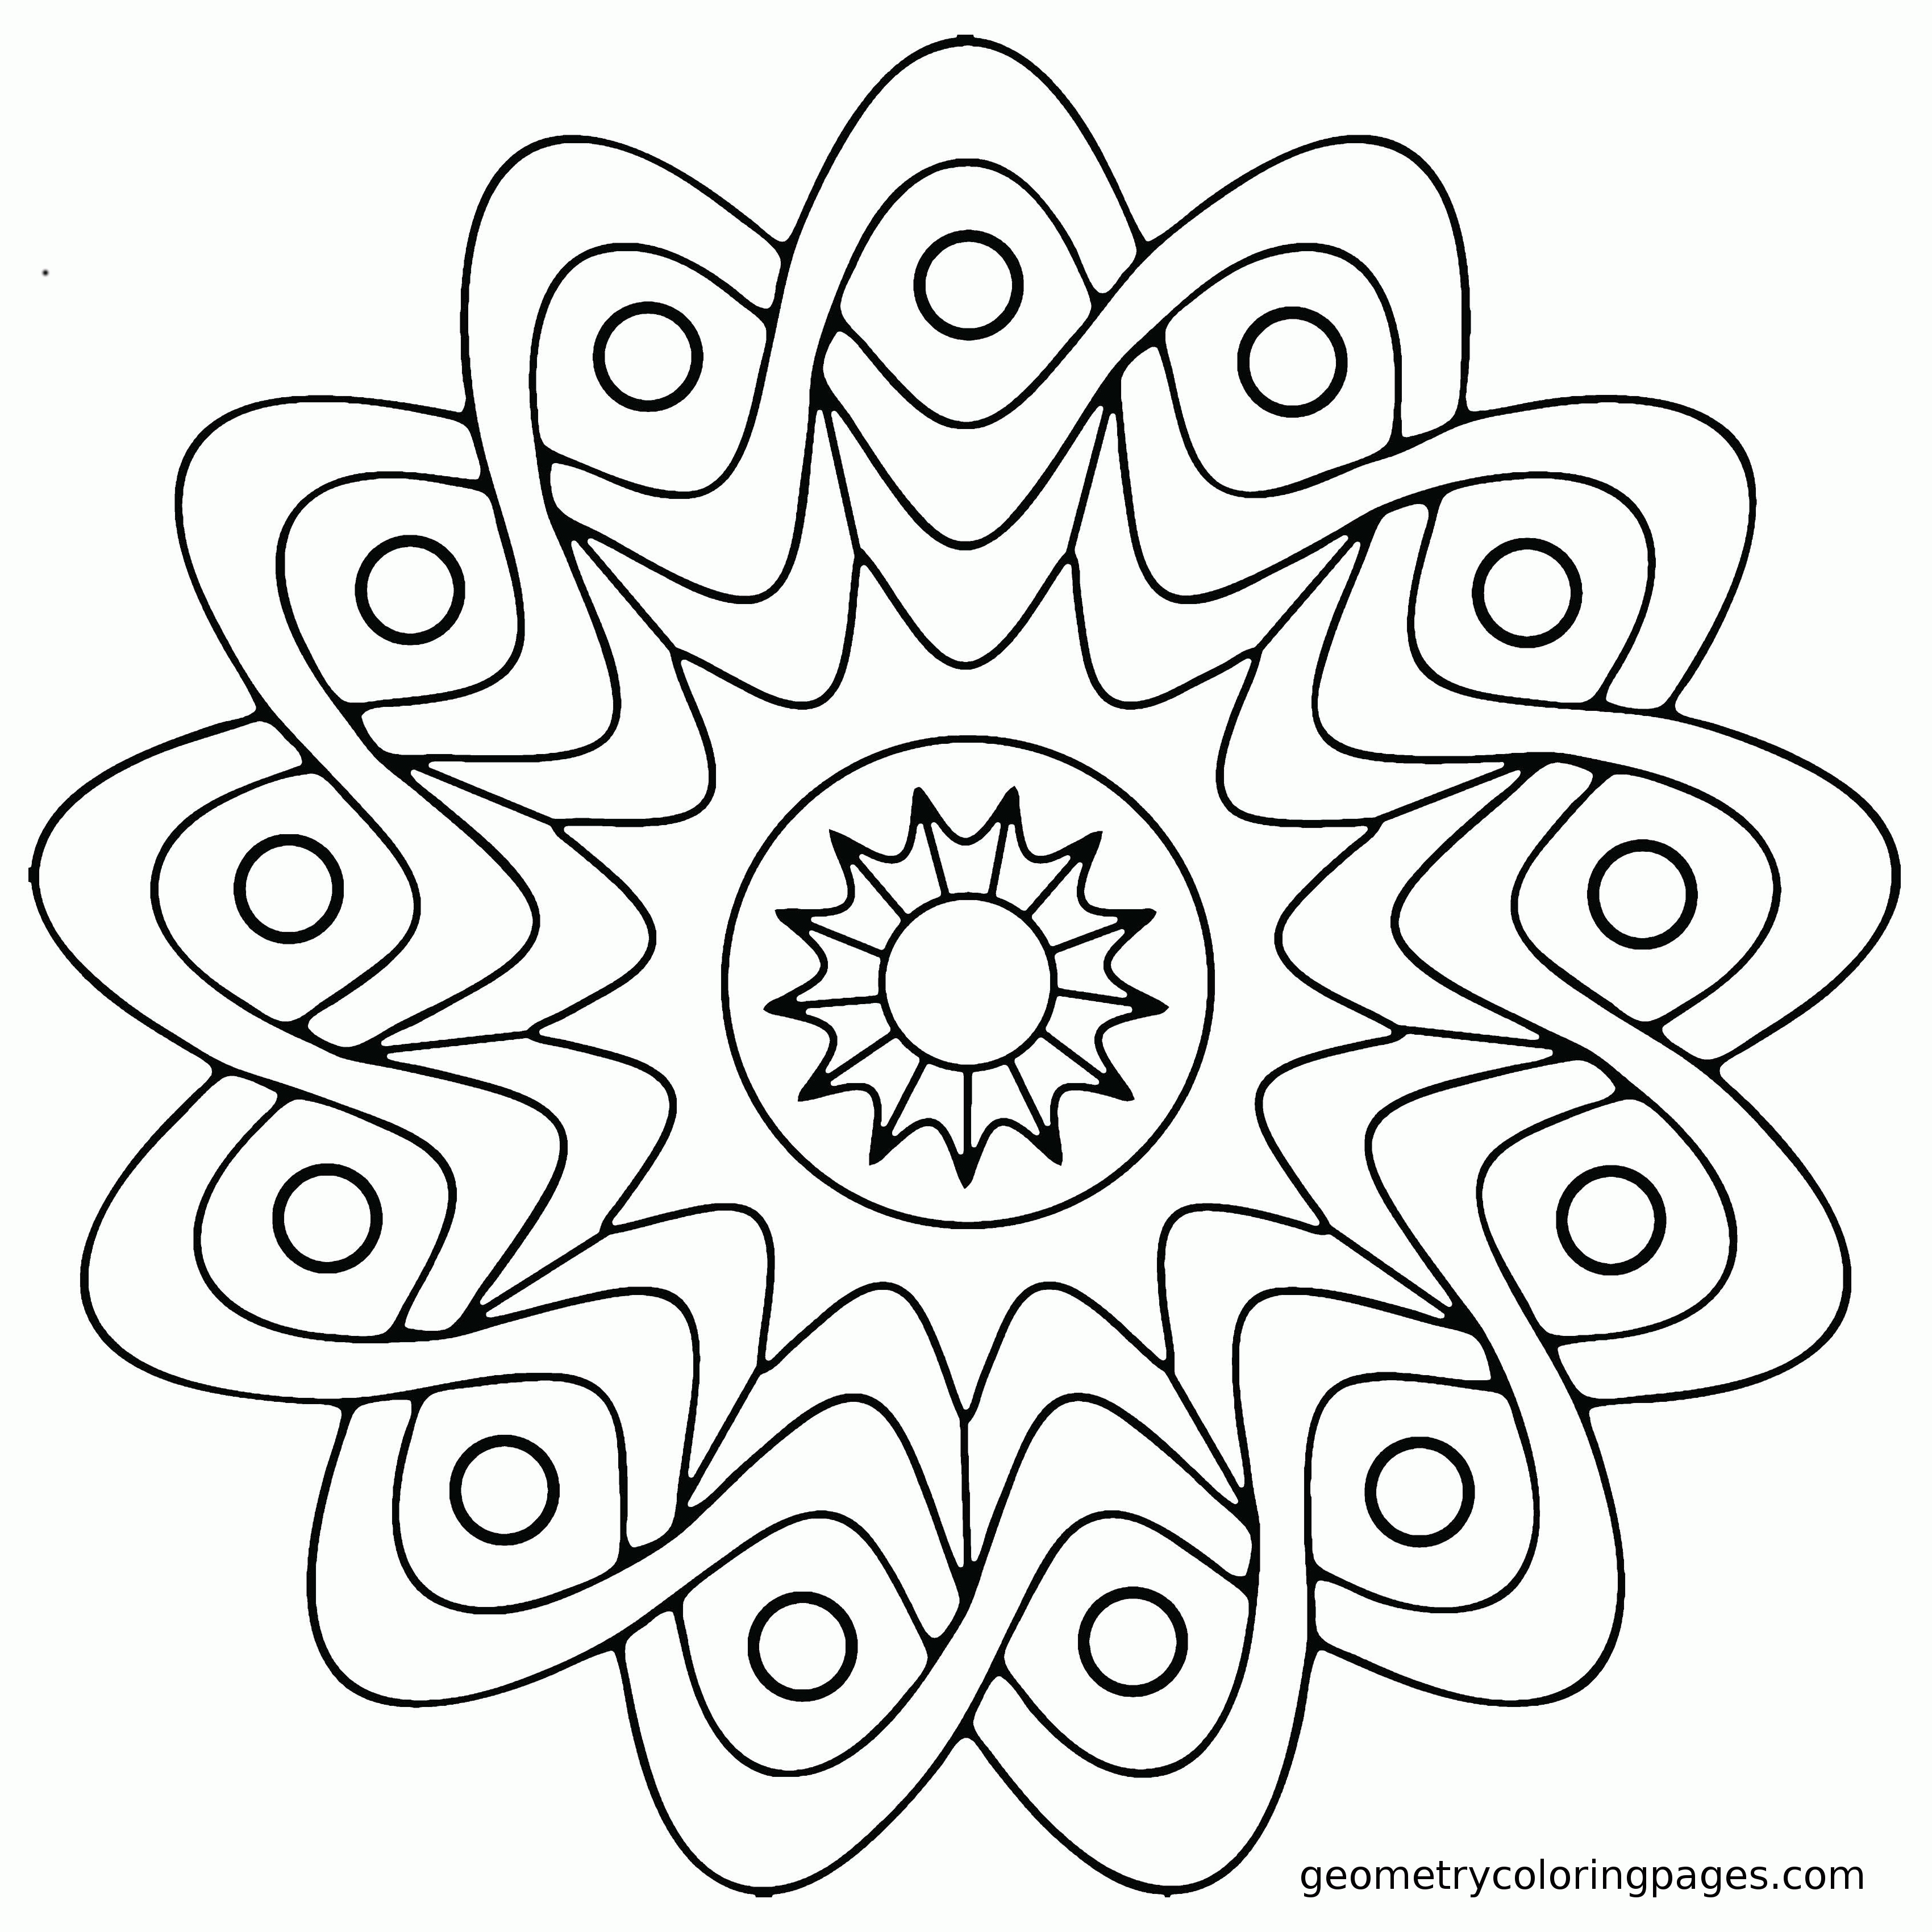 Mandala Coloring Pages Easy Coloring Home